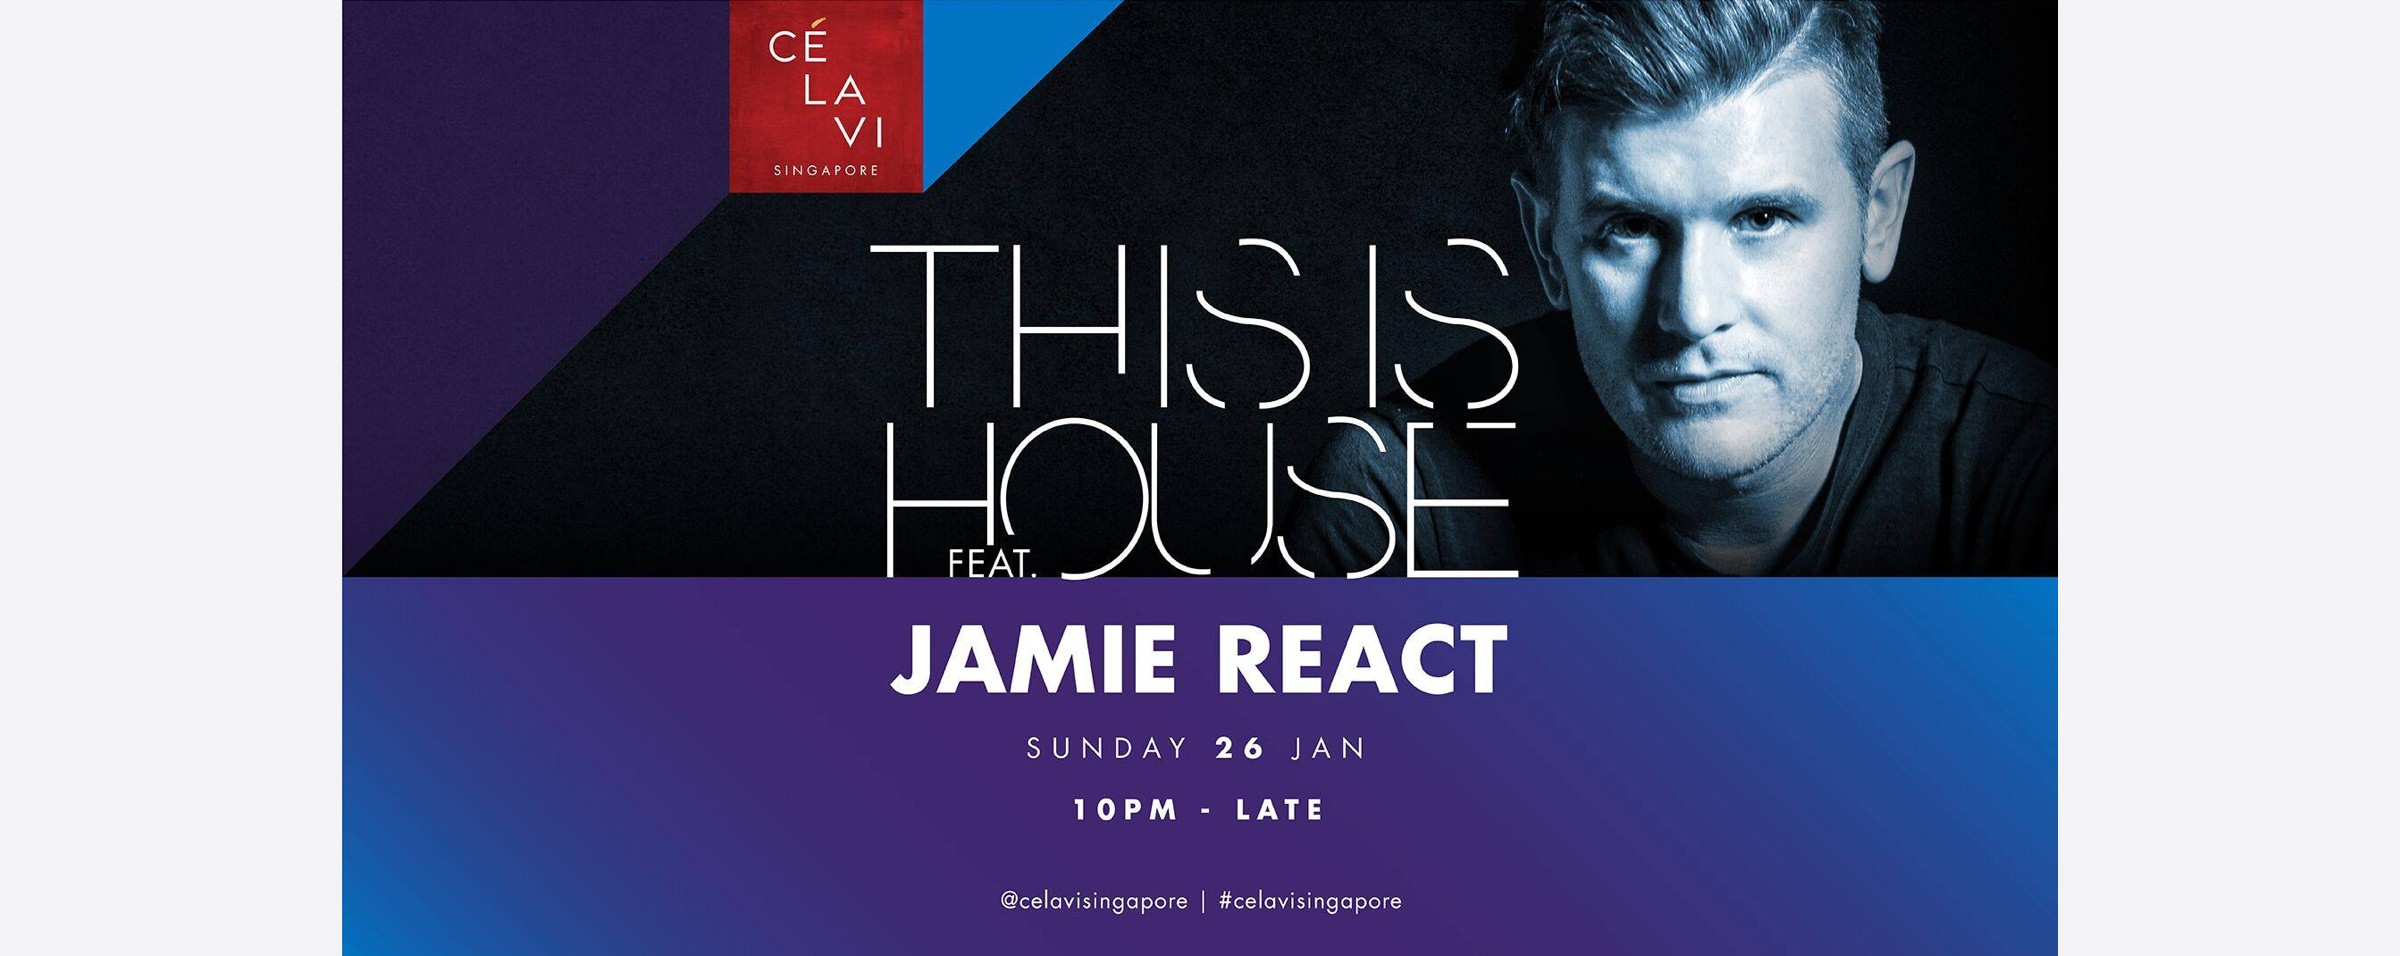 This Is House Feat. Jamie React 